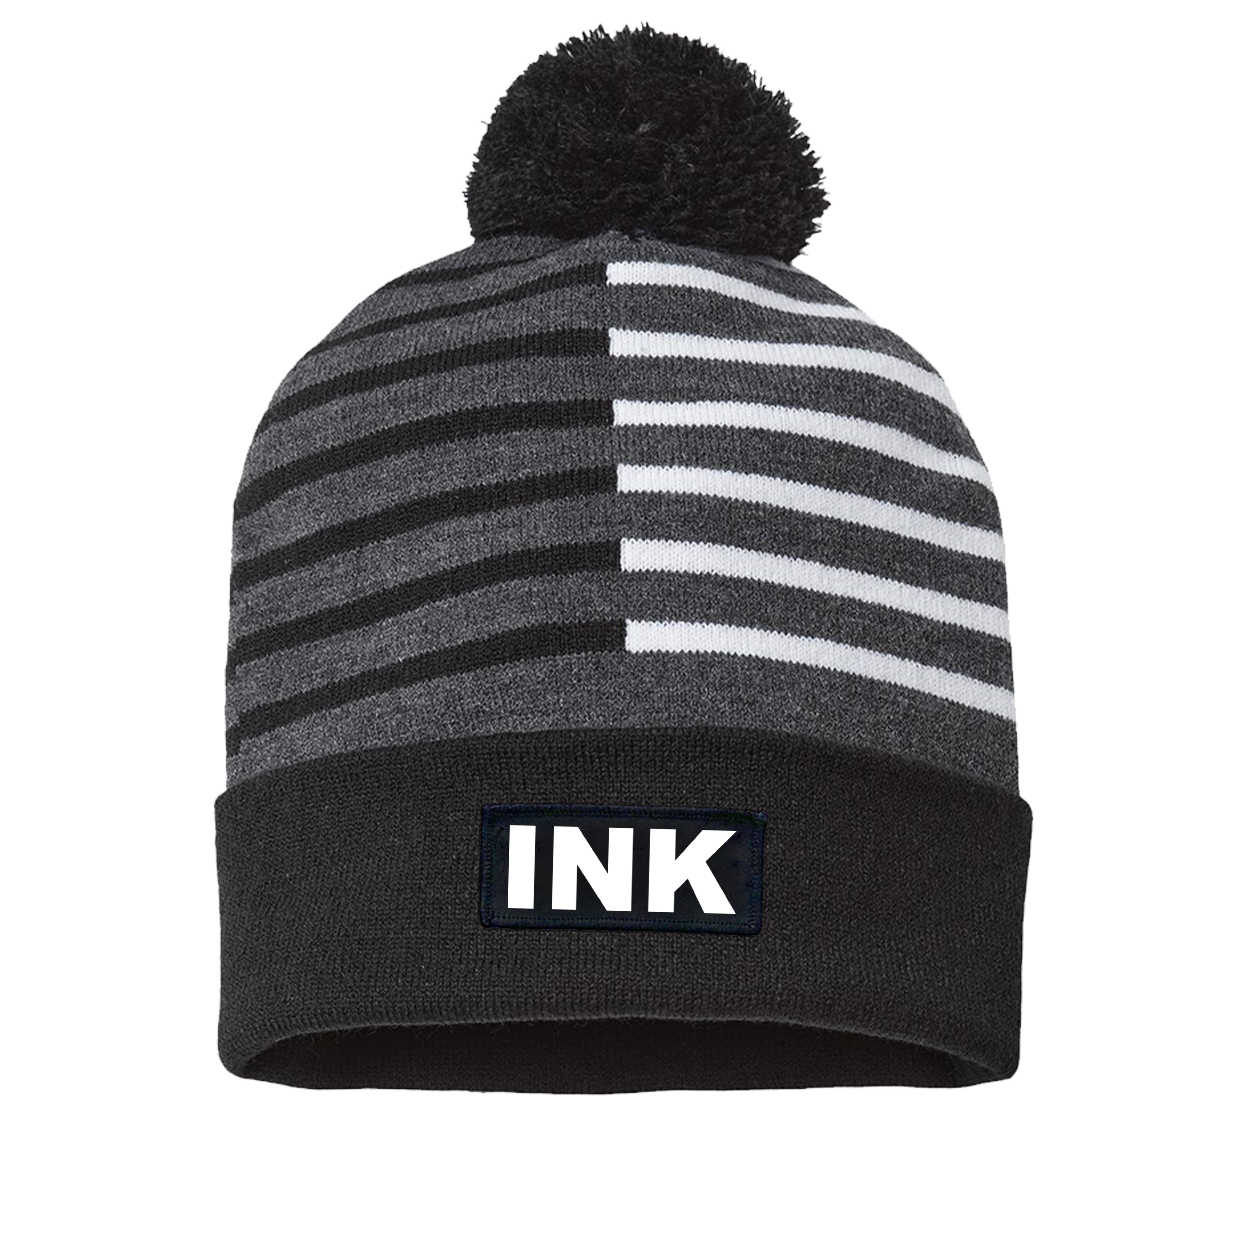 Ink Brand Logo Night Out Woven Patch Roll Up Pom Knit Beanie Half Color Black/White (White Logo)